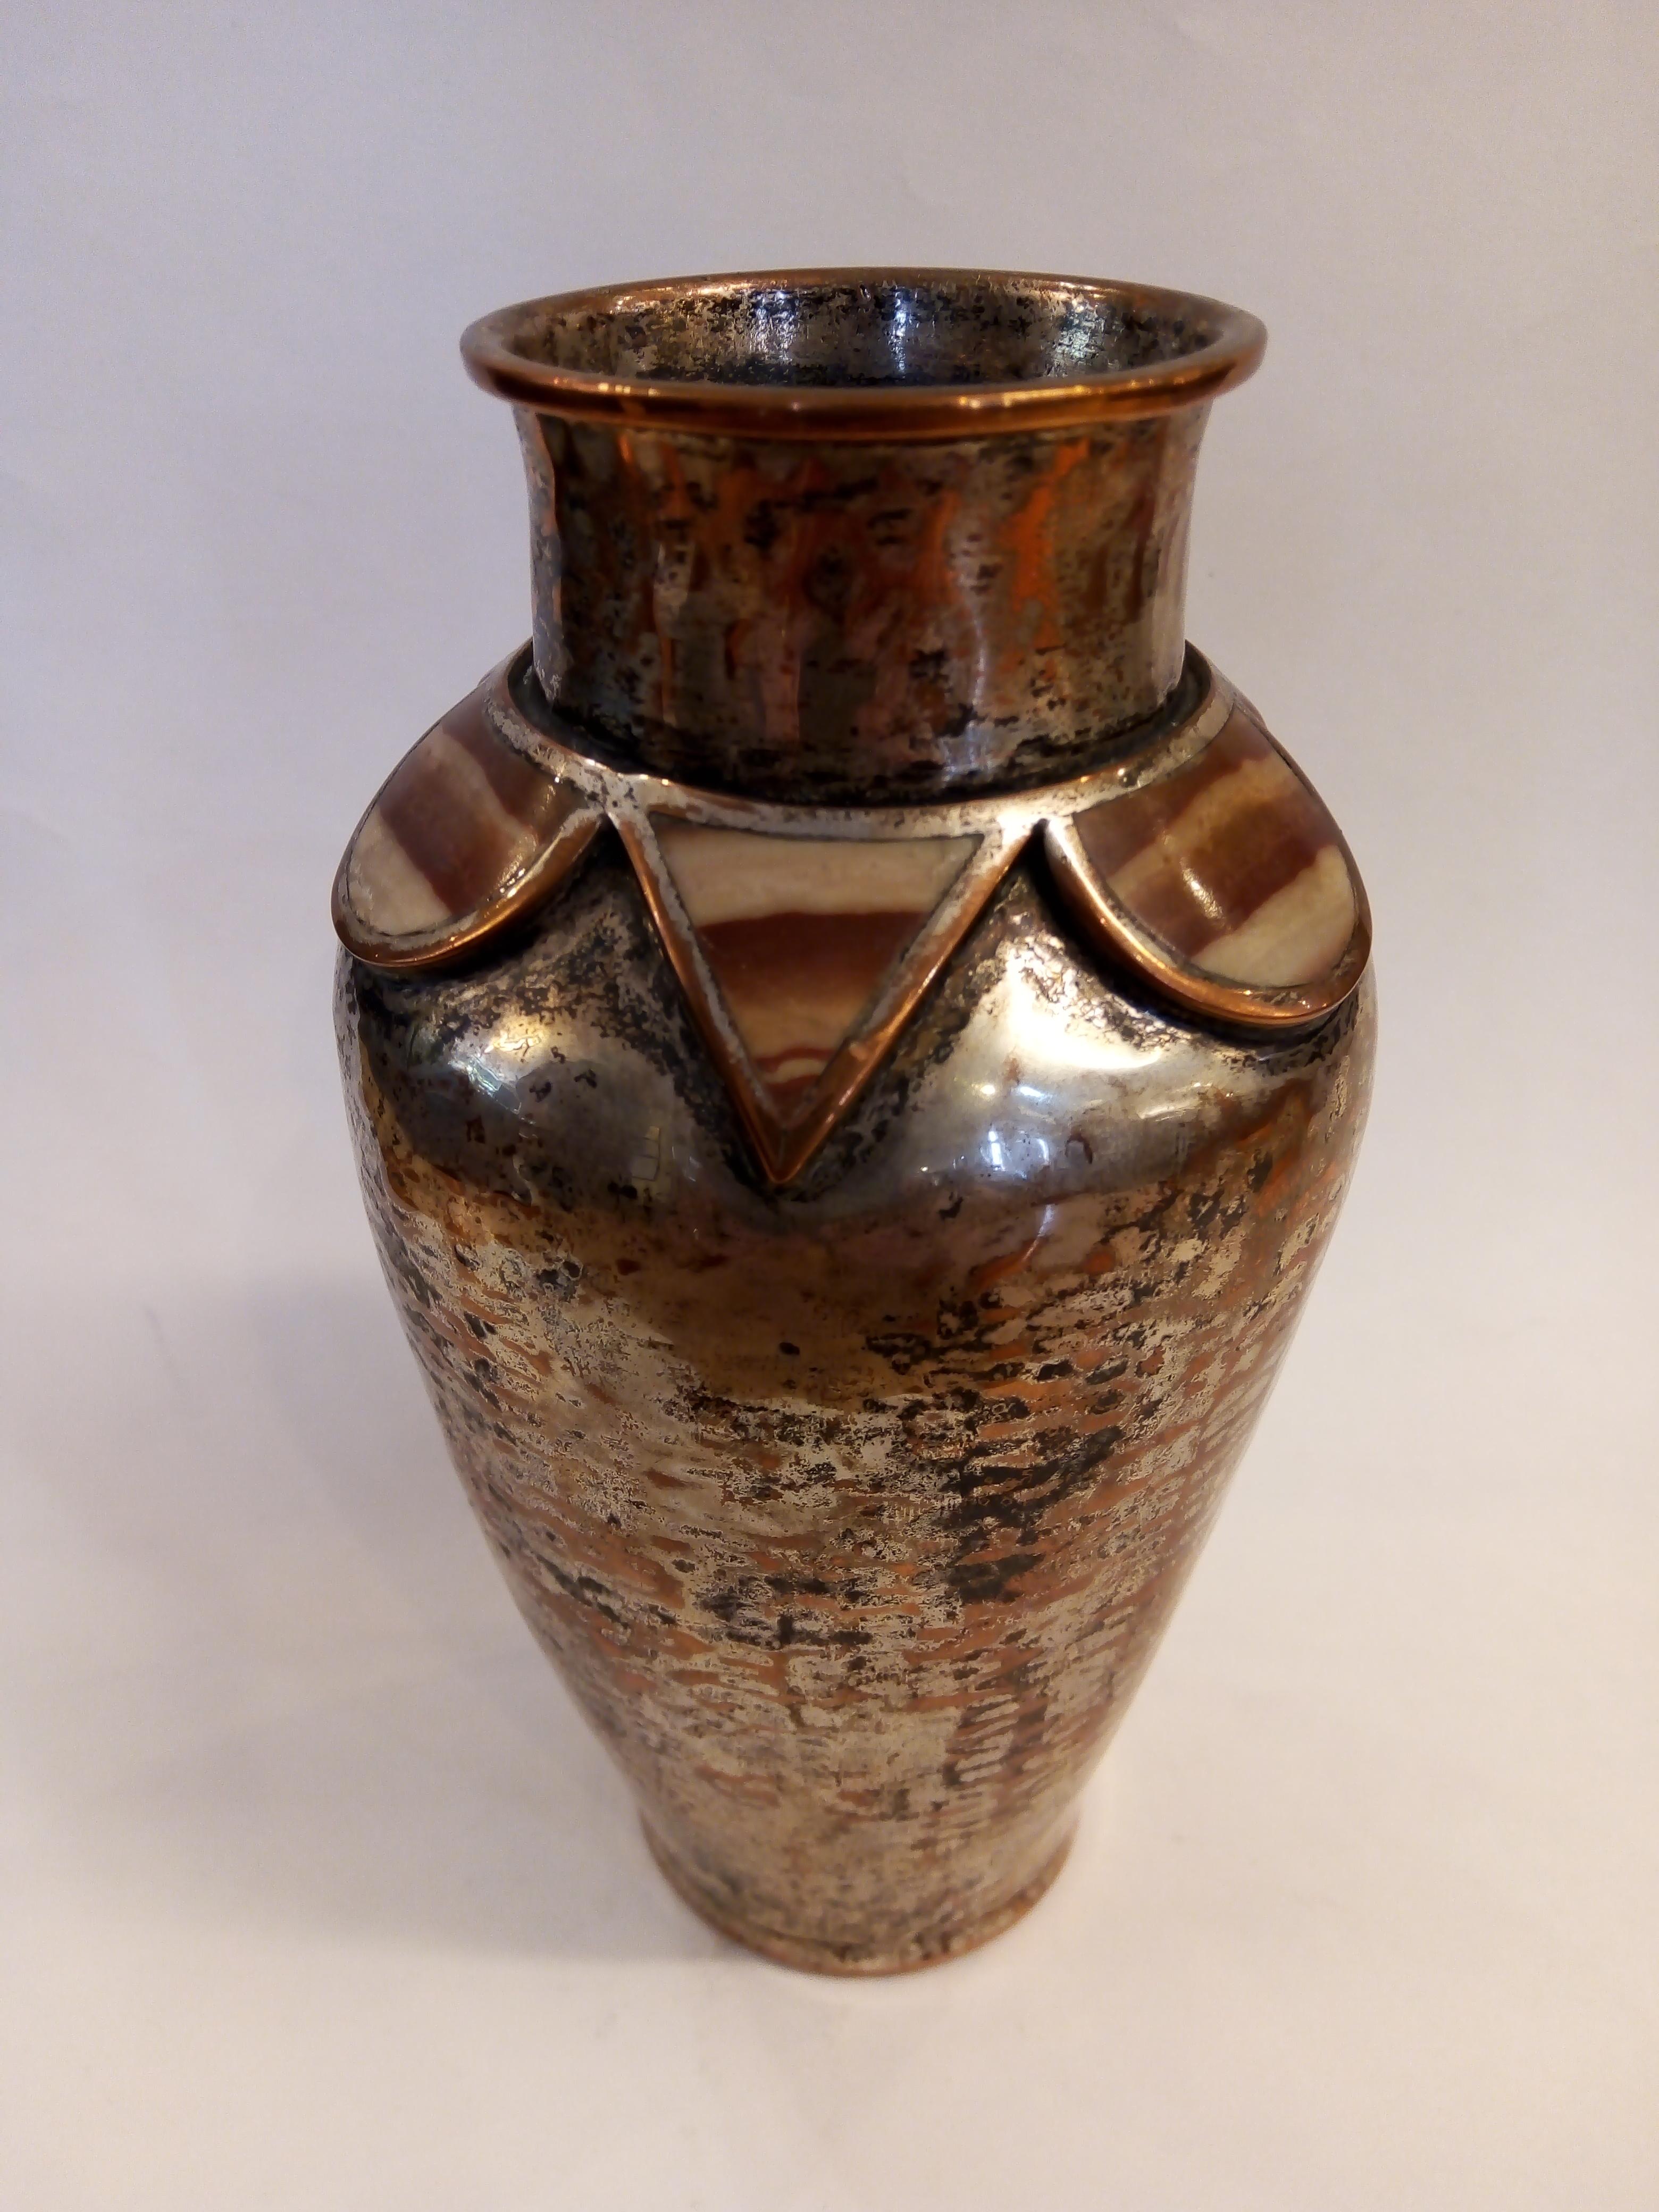 Modern Special Vase in Plated Hammered Copper and Onyx Inlays by Emilia Castillo Taxco